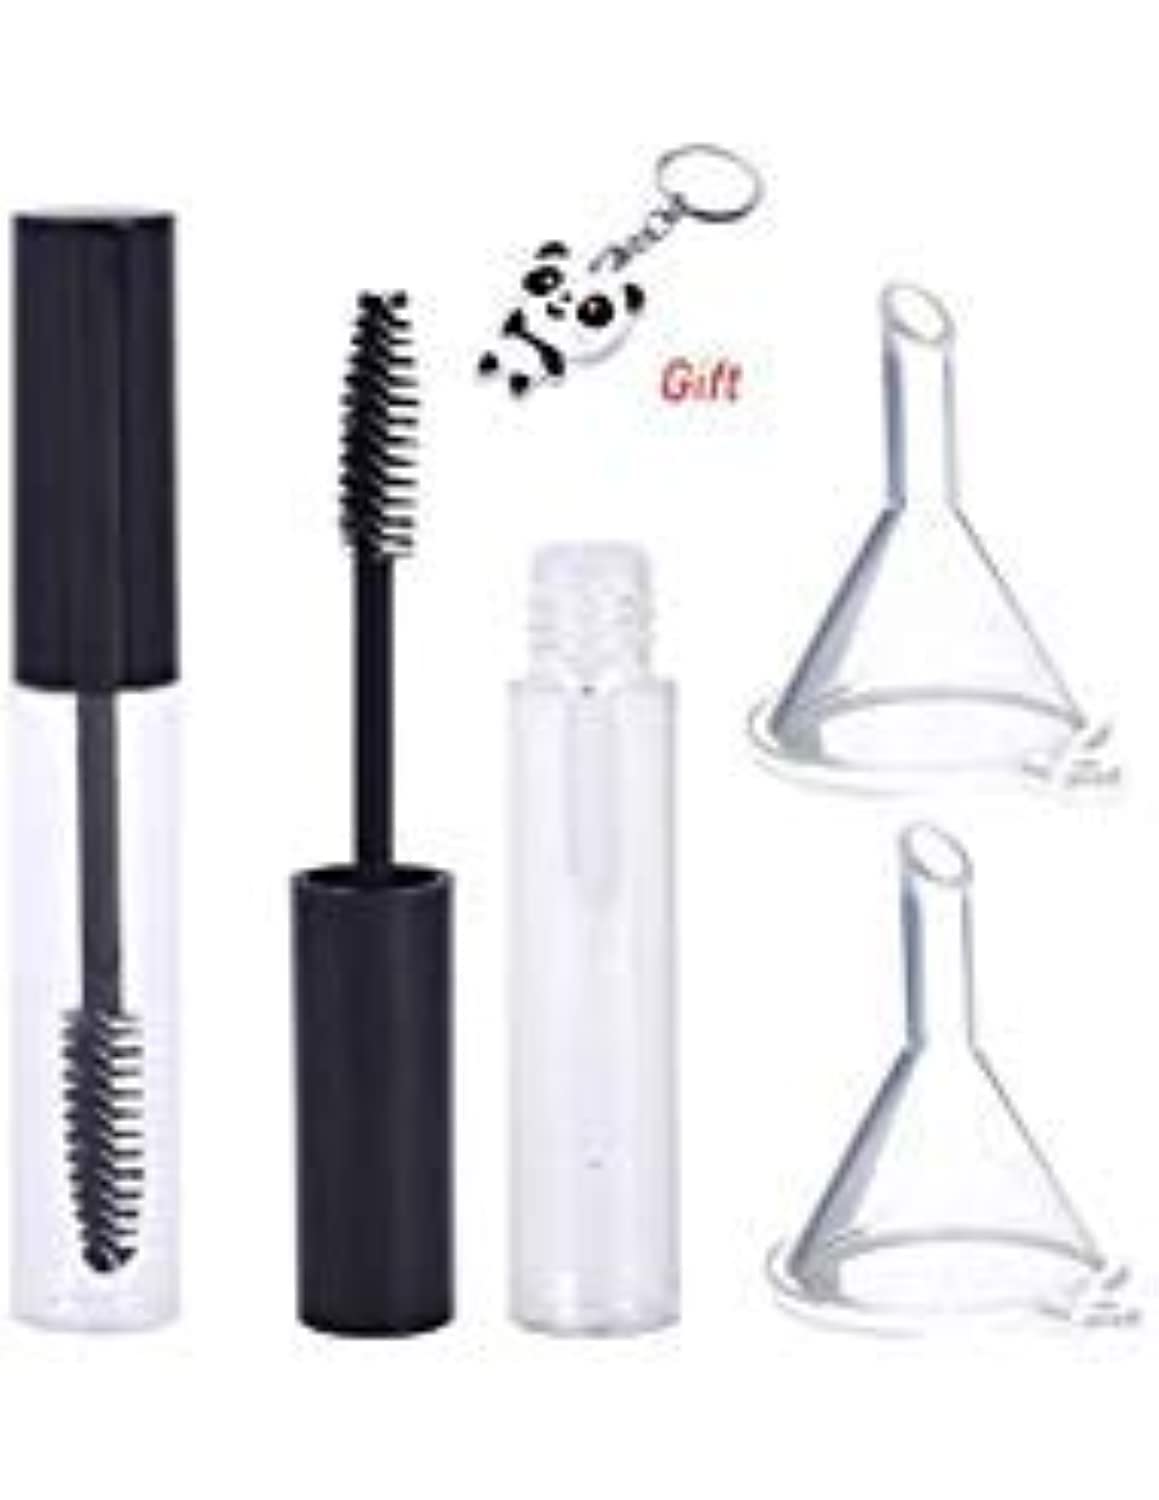 2Pcs 10ml Empty Mascara Tube with Eyelash Wand, Eyelash Cream Container Bottle with Funnels Transfer Pipettes for Travel, Home